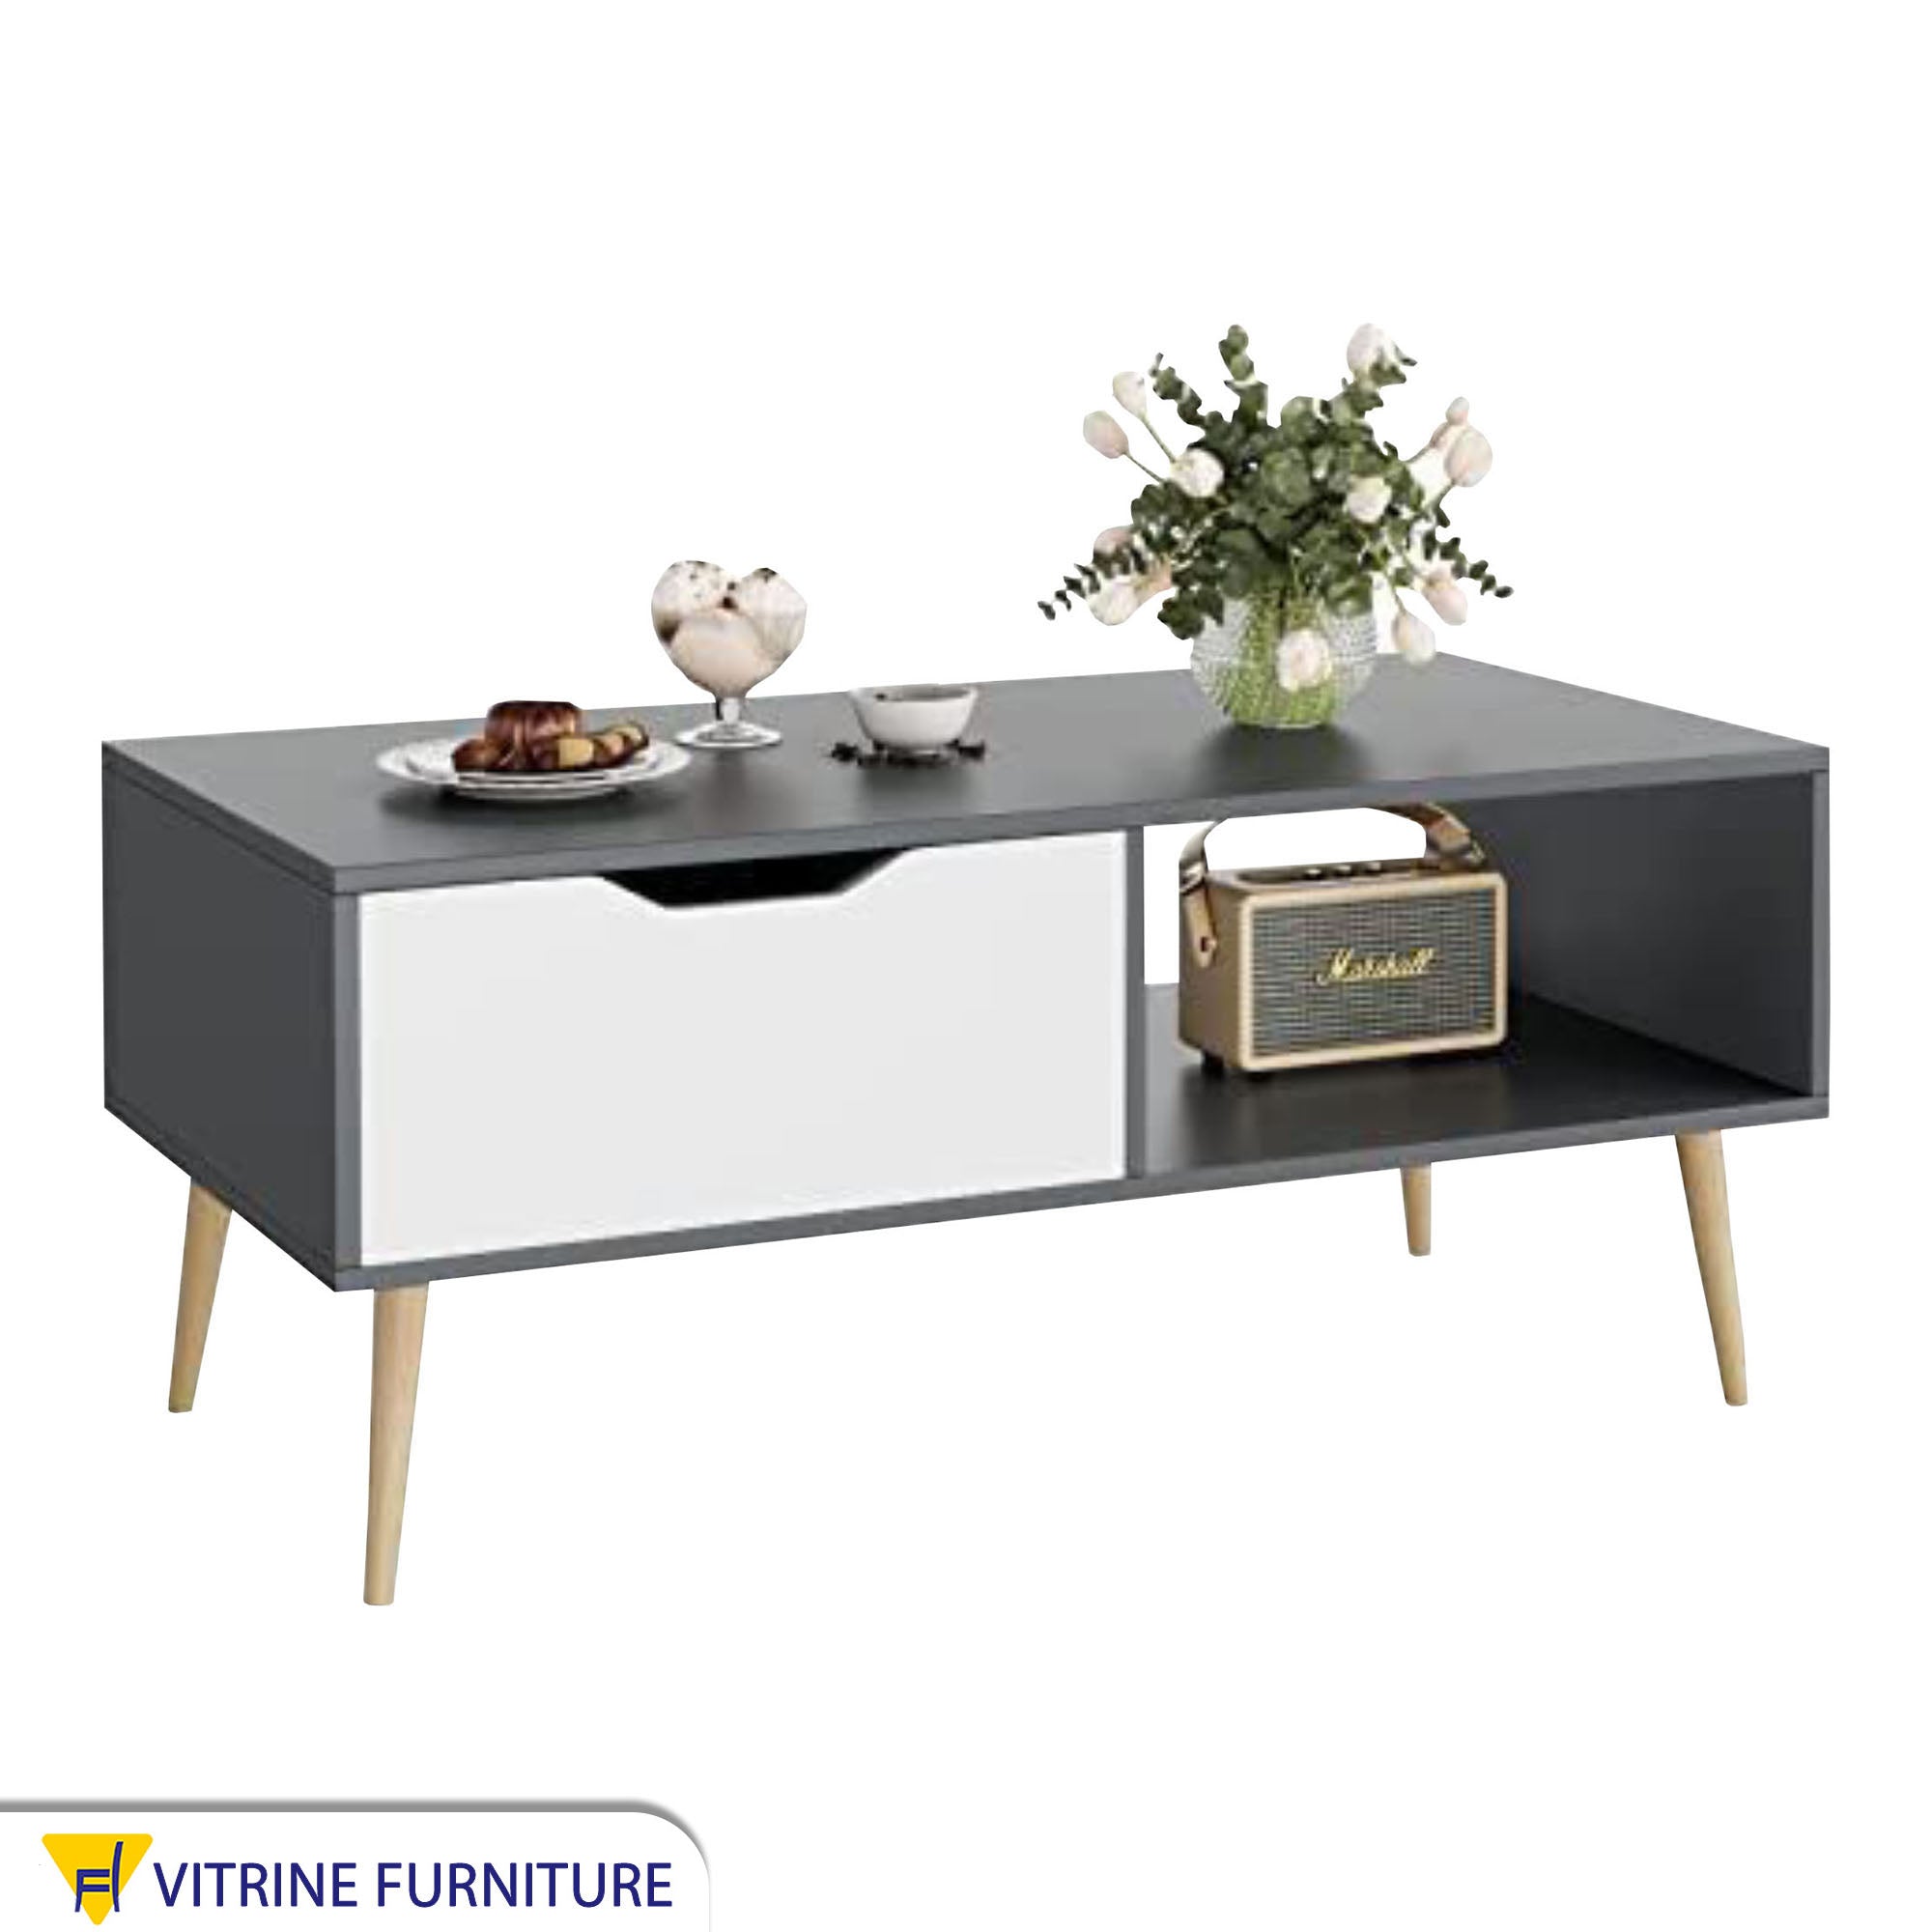 Modern table with internal storage space